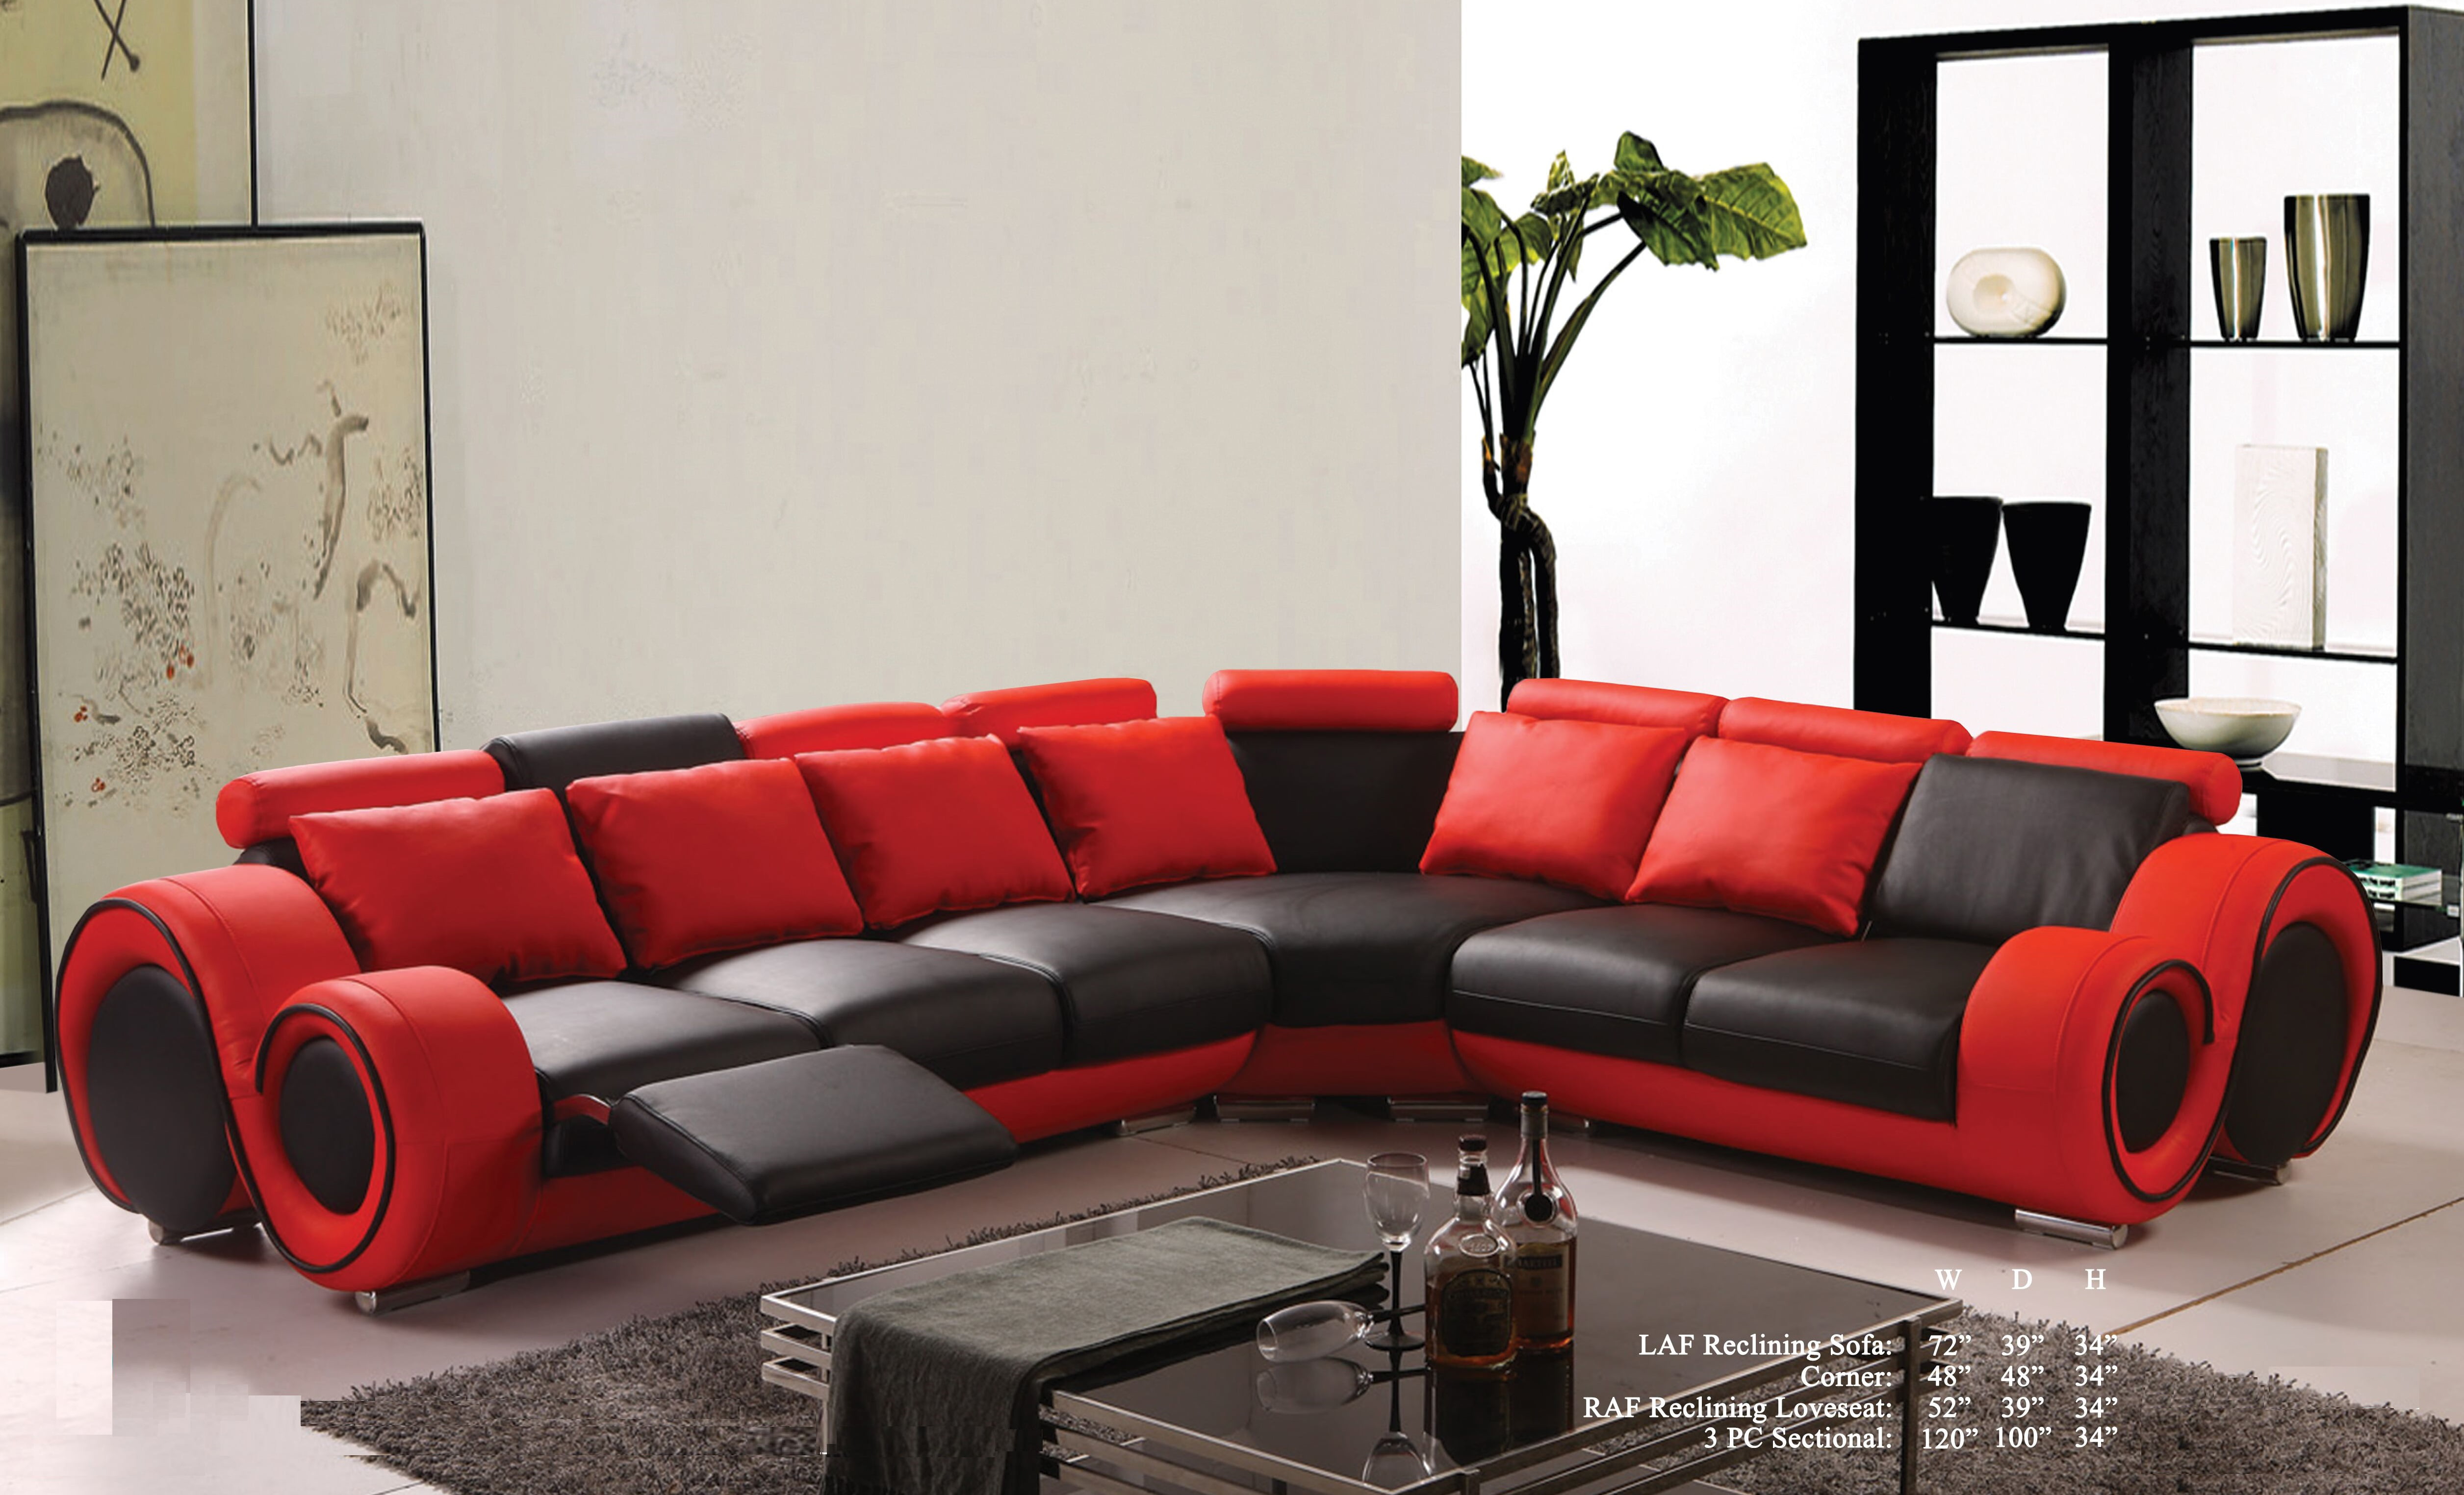 Black Bonded Leather Sectional Sofa Set, Red And Black Leather Furniture